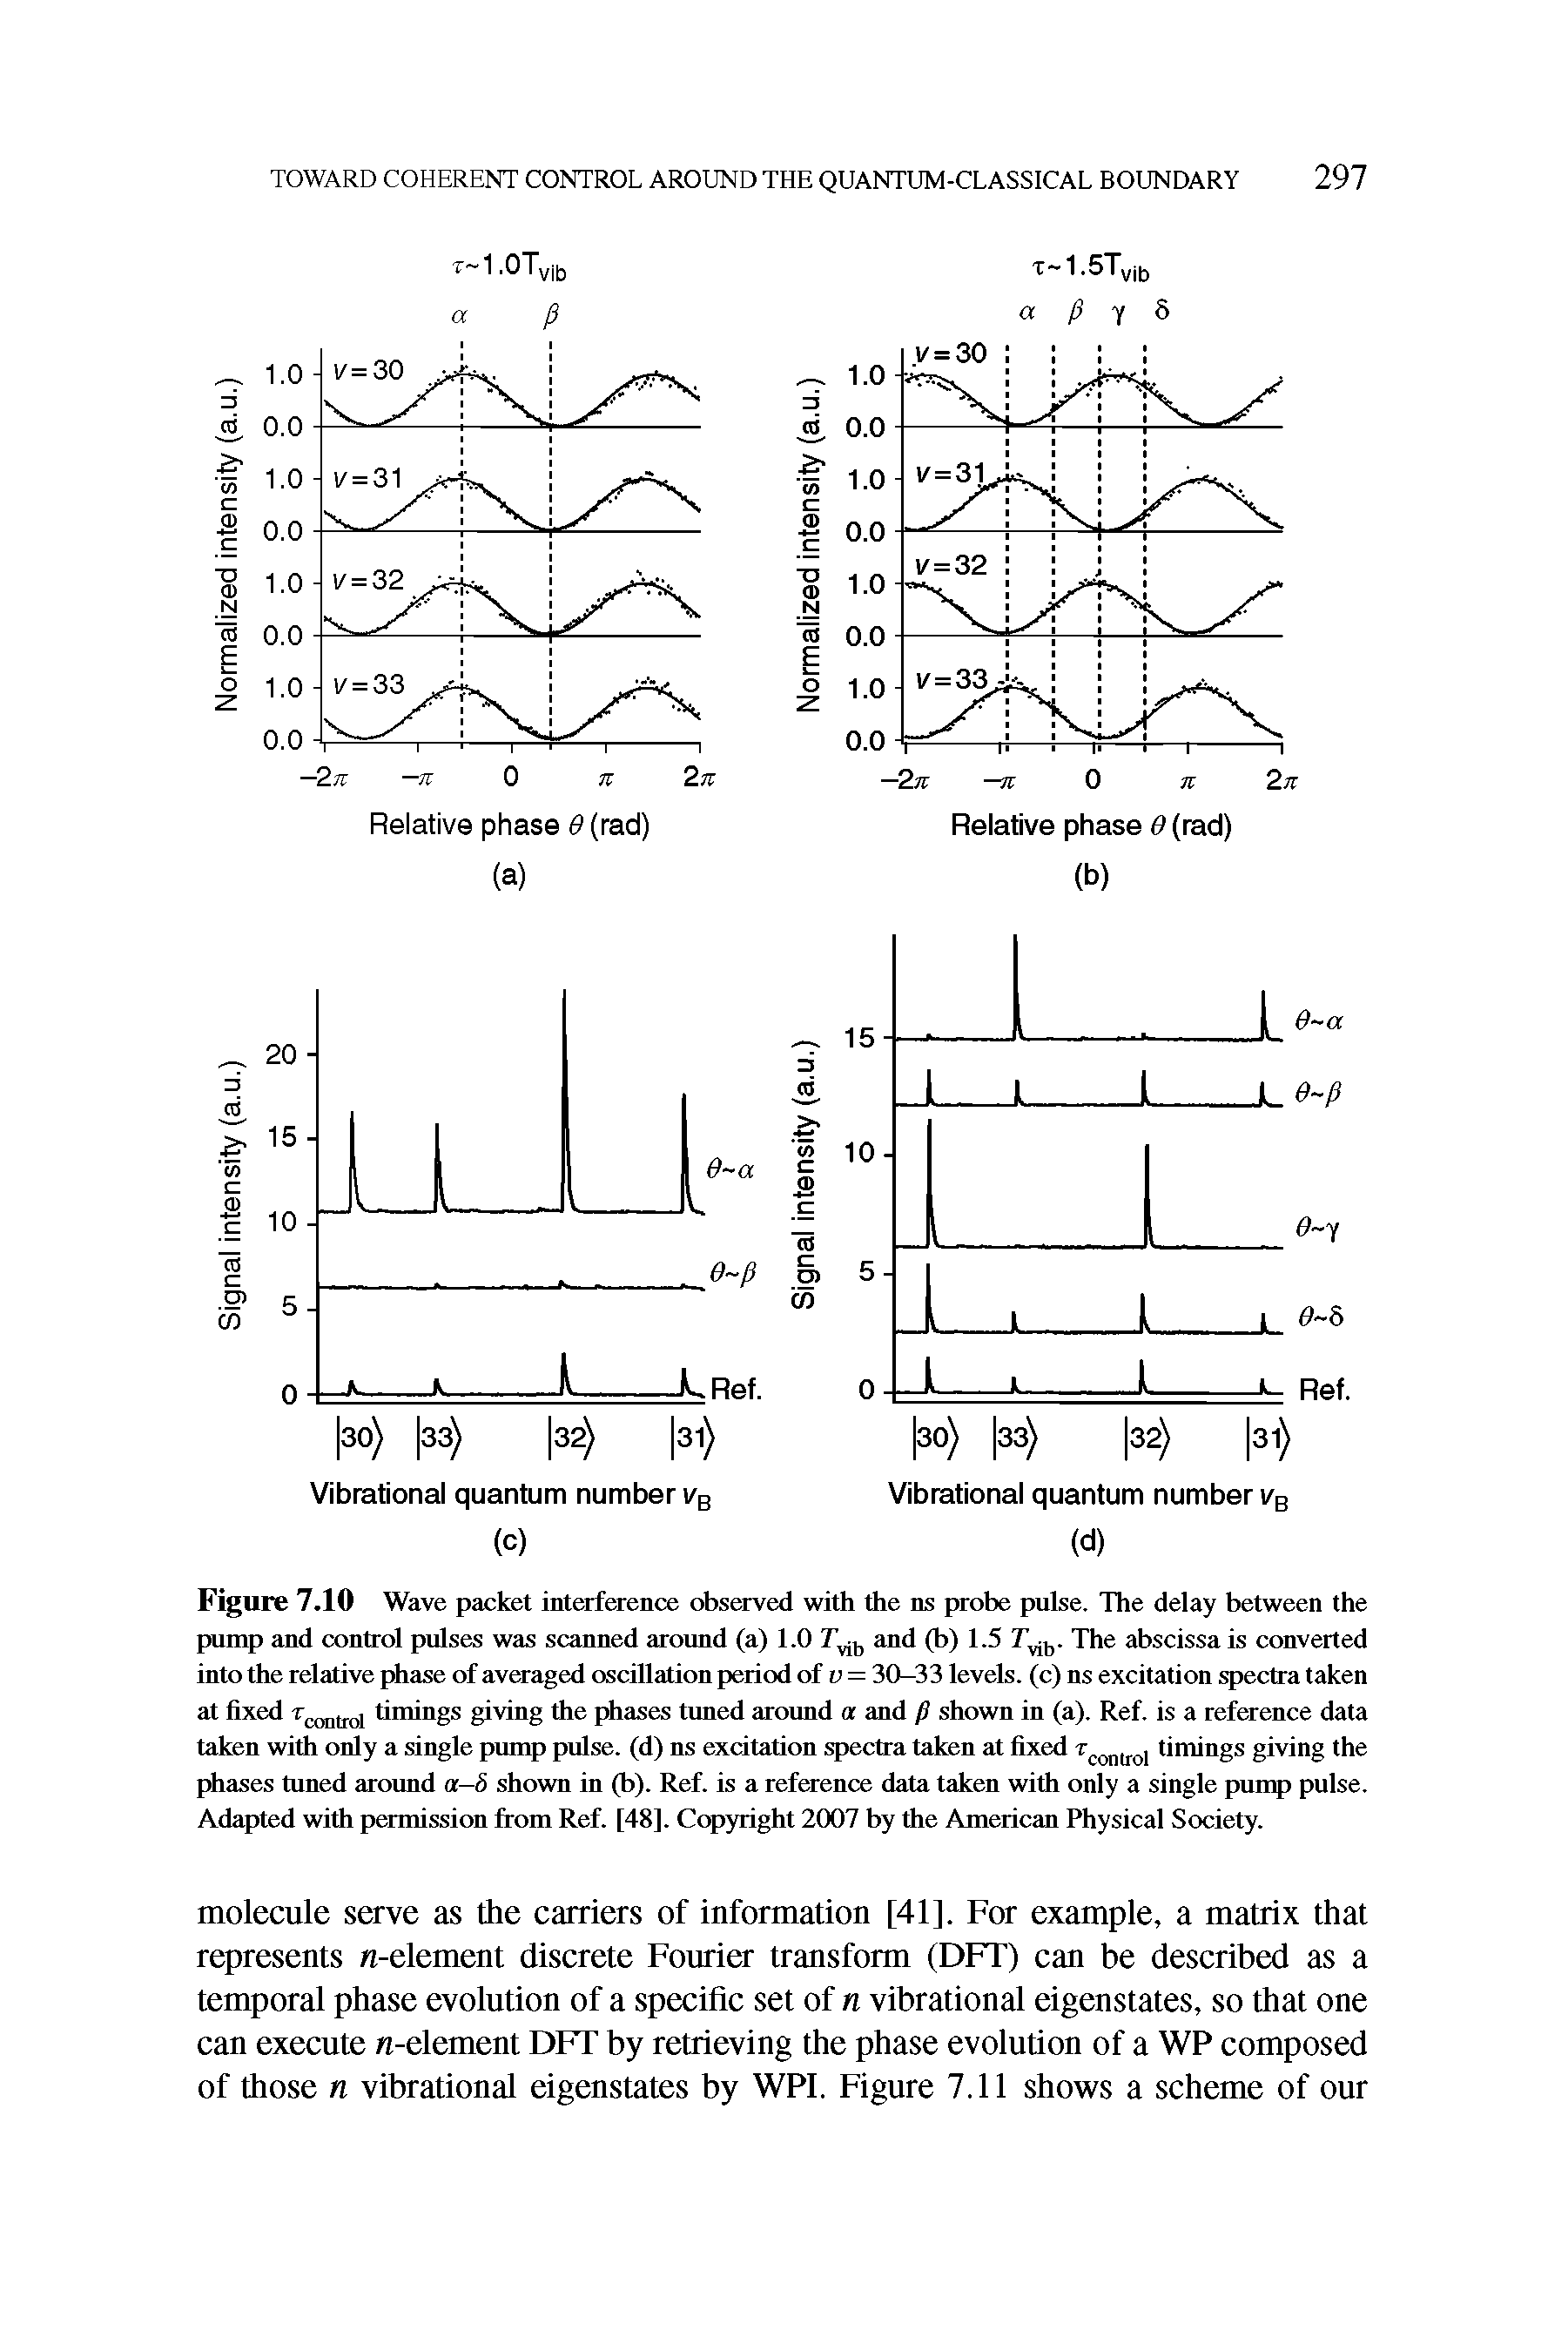 Figure 7.10 Wave packet interference observed with die ns probe pulse. The delay between the pump and control pulses was scanned around (a) 1.0 and (b) 1.5 The abscissa is converted into the relative phase of averaged oscillation period of y = 30—33 levels, (c) ns excitation spectra taken at fixed timings giving die phases tuned around a and shown in (a). Ref. is a reference data...